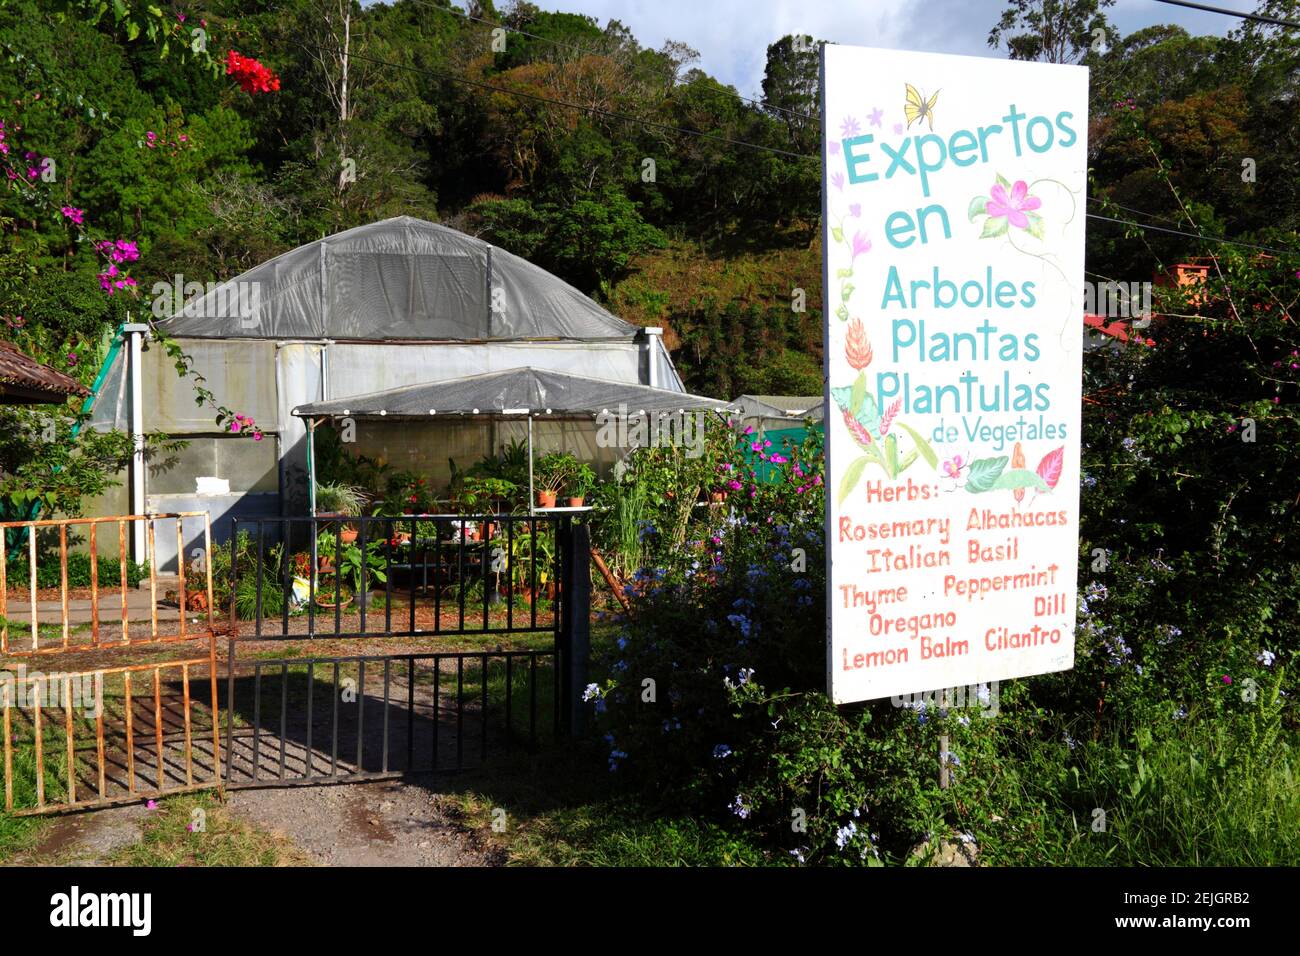 Sign outside garden centre / nursery selling herbs, flowers and plants, Boquete, Chiriqui Province, Panama Stock Photo